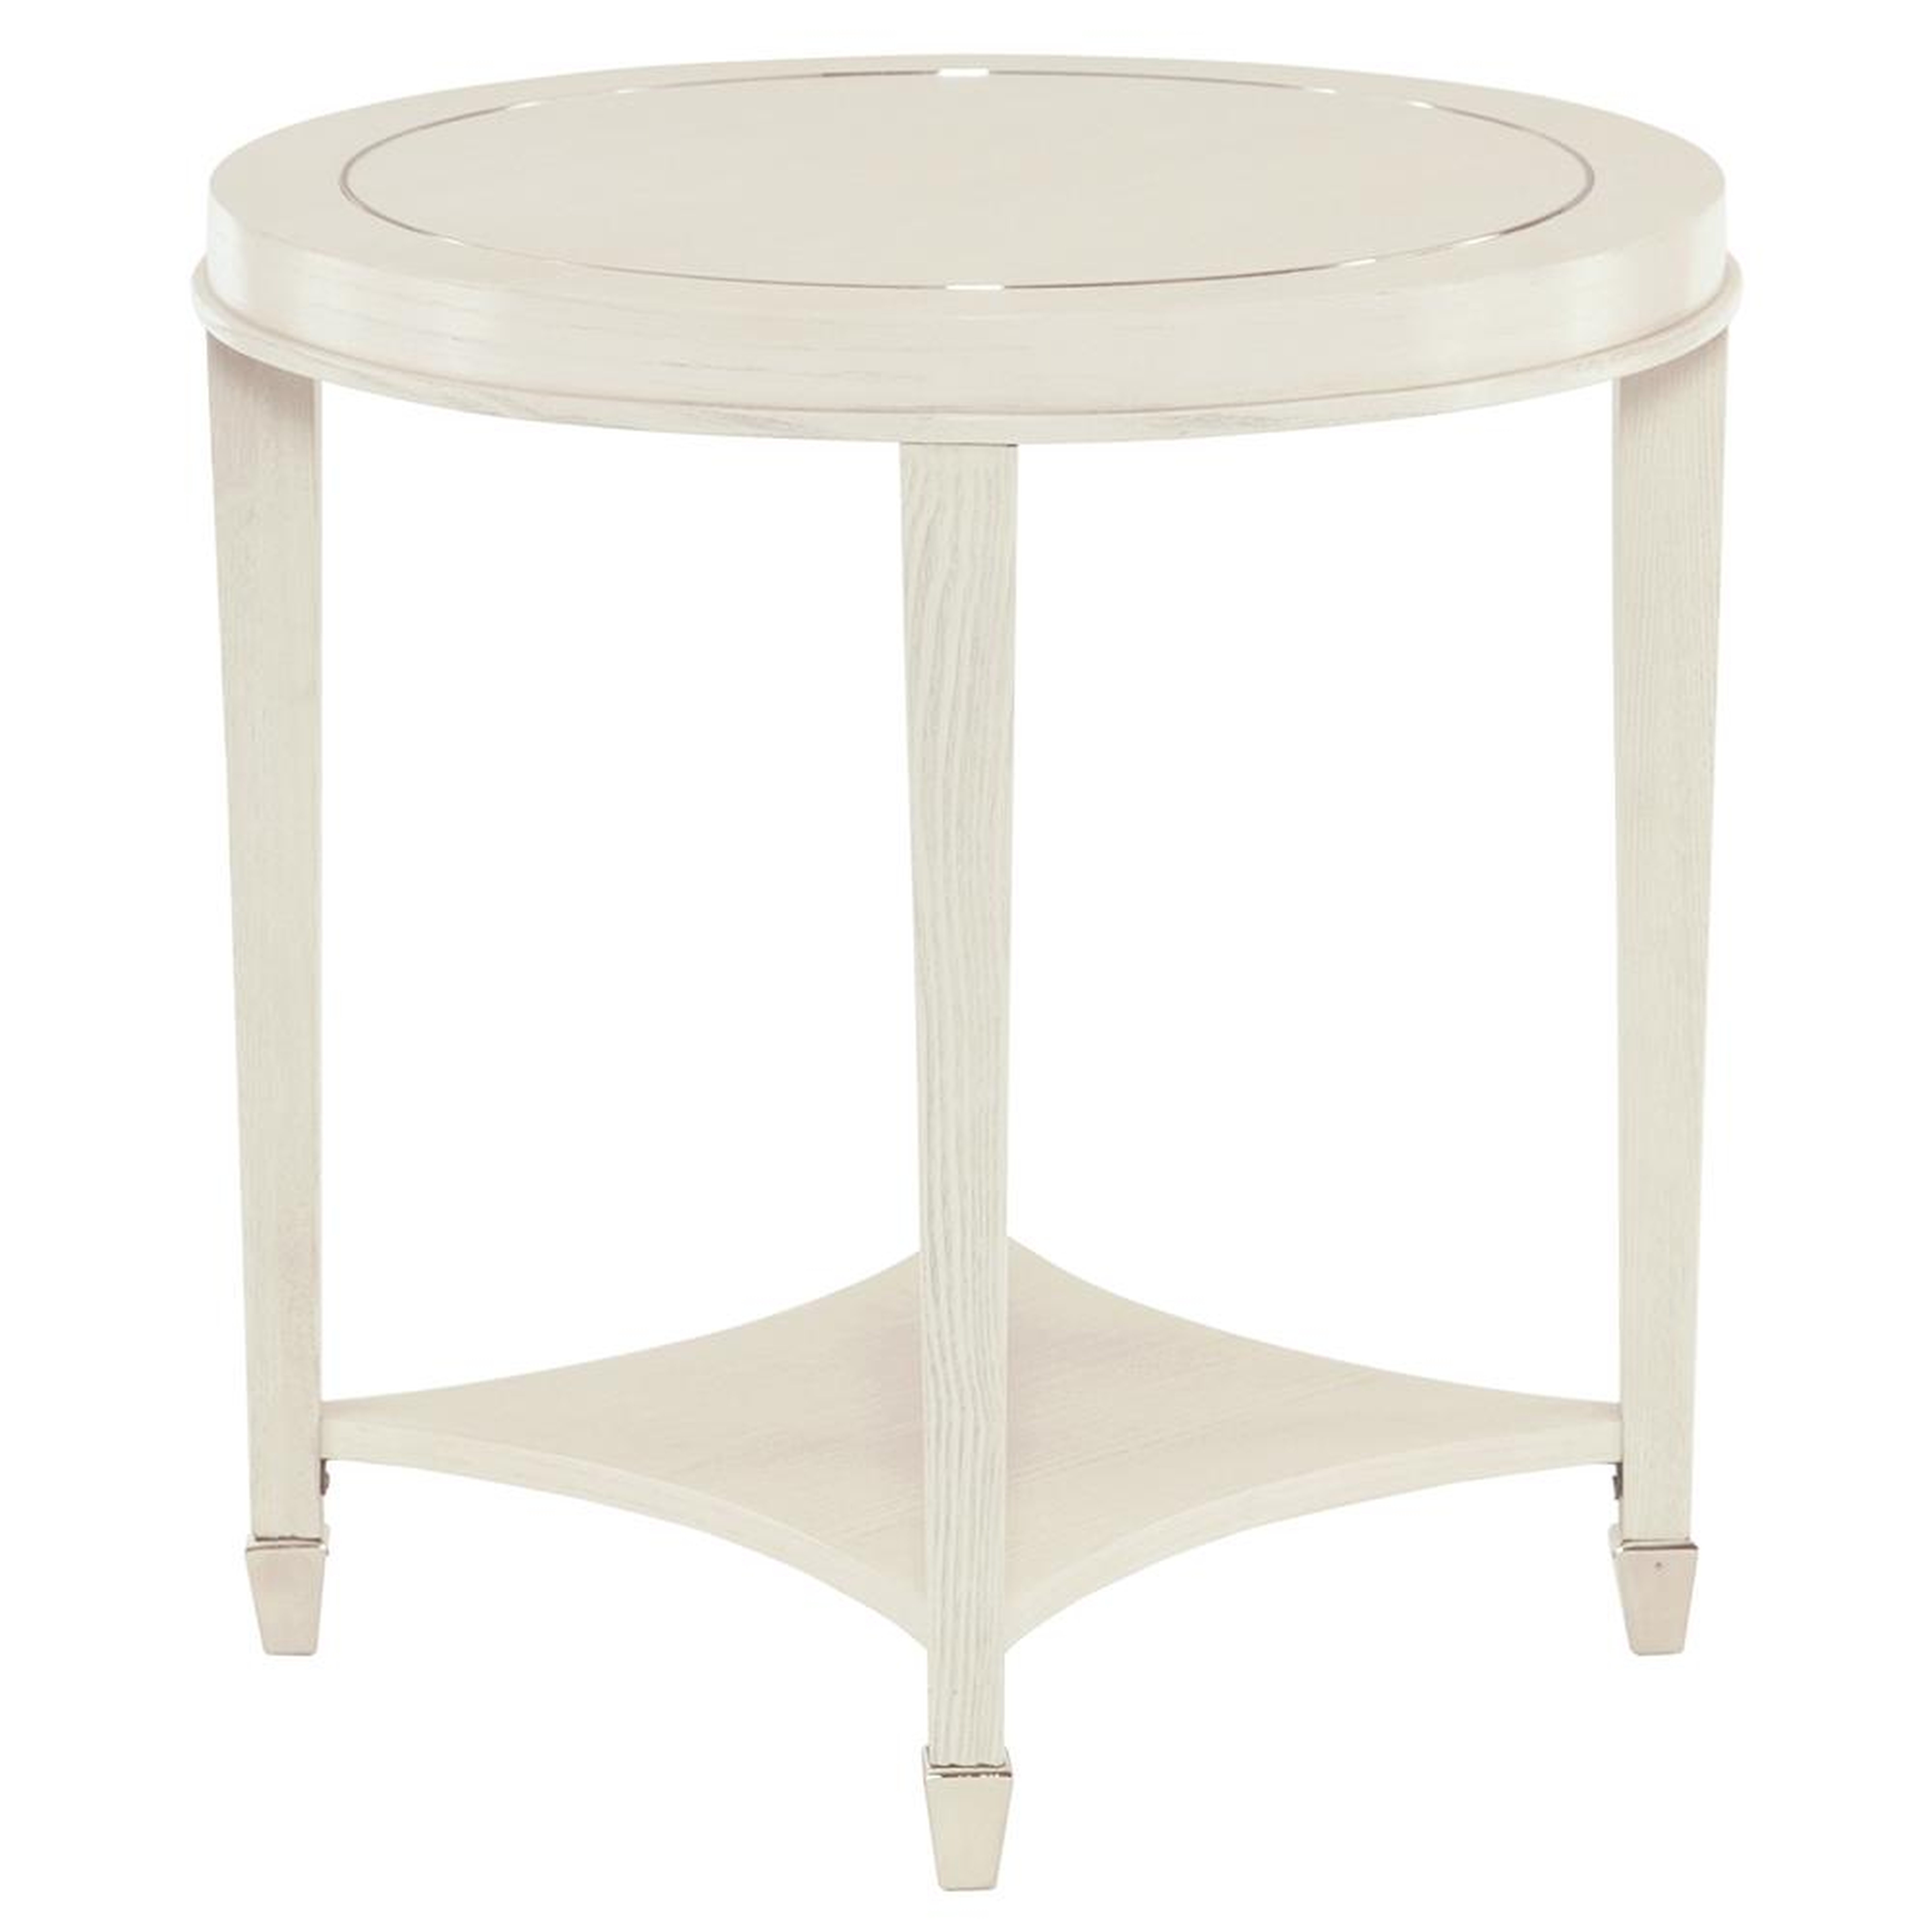 Gretta Polished Ivory Hollywood Regency Inlay Round Side Table - Kathy Kuo Home